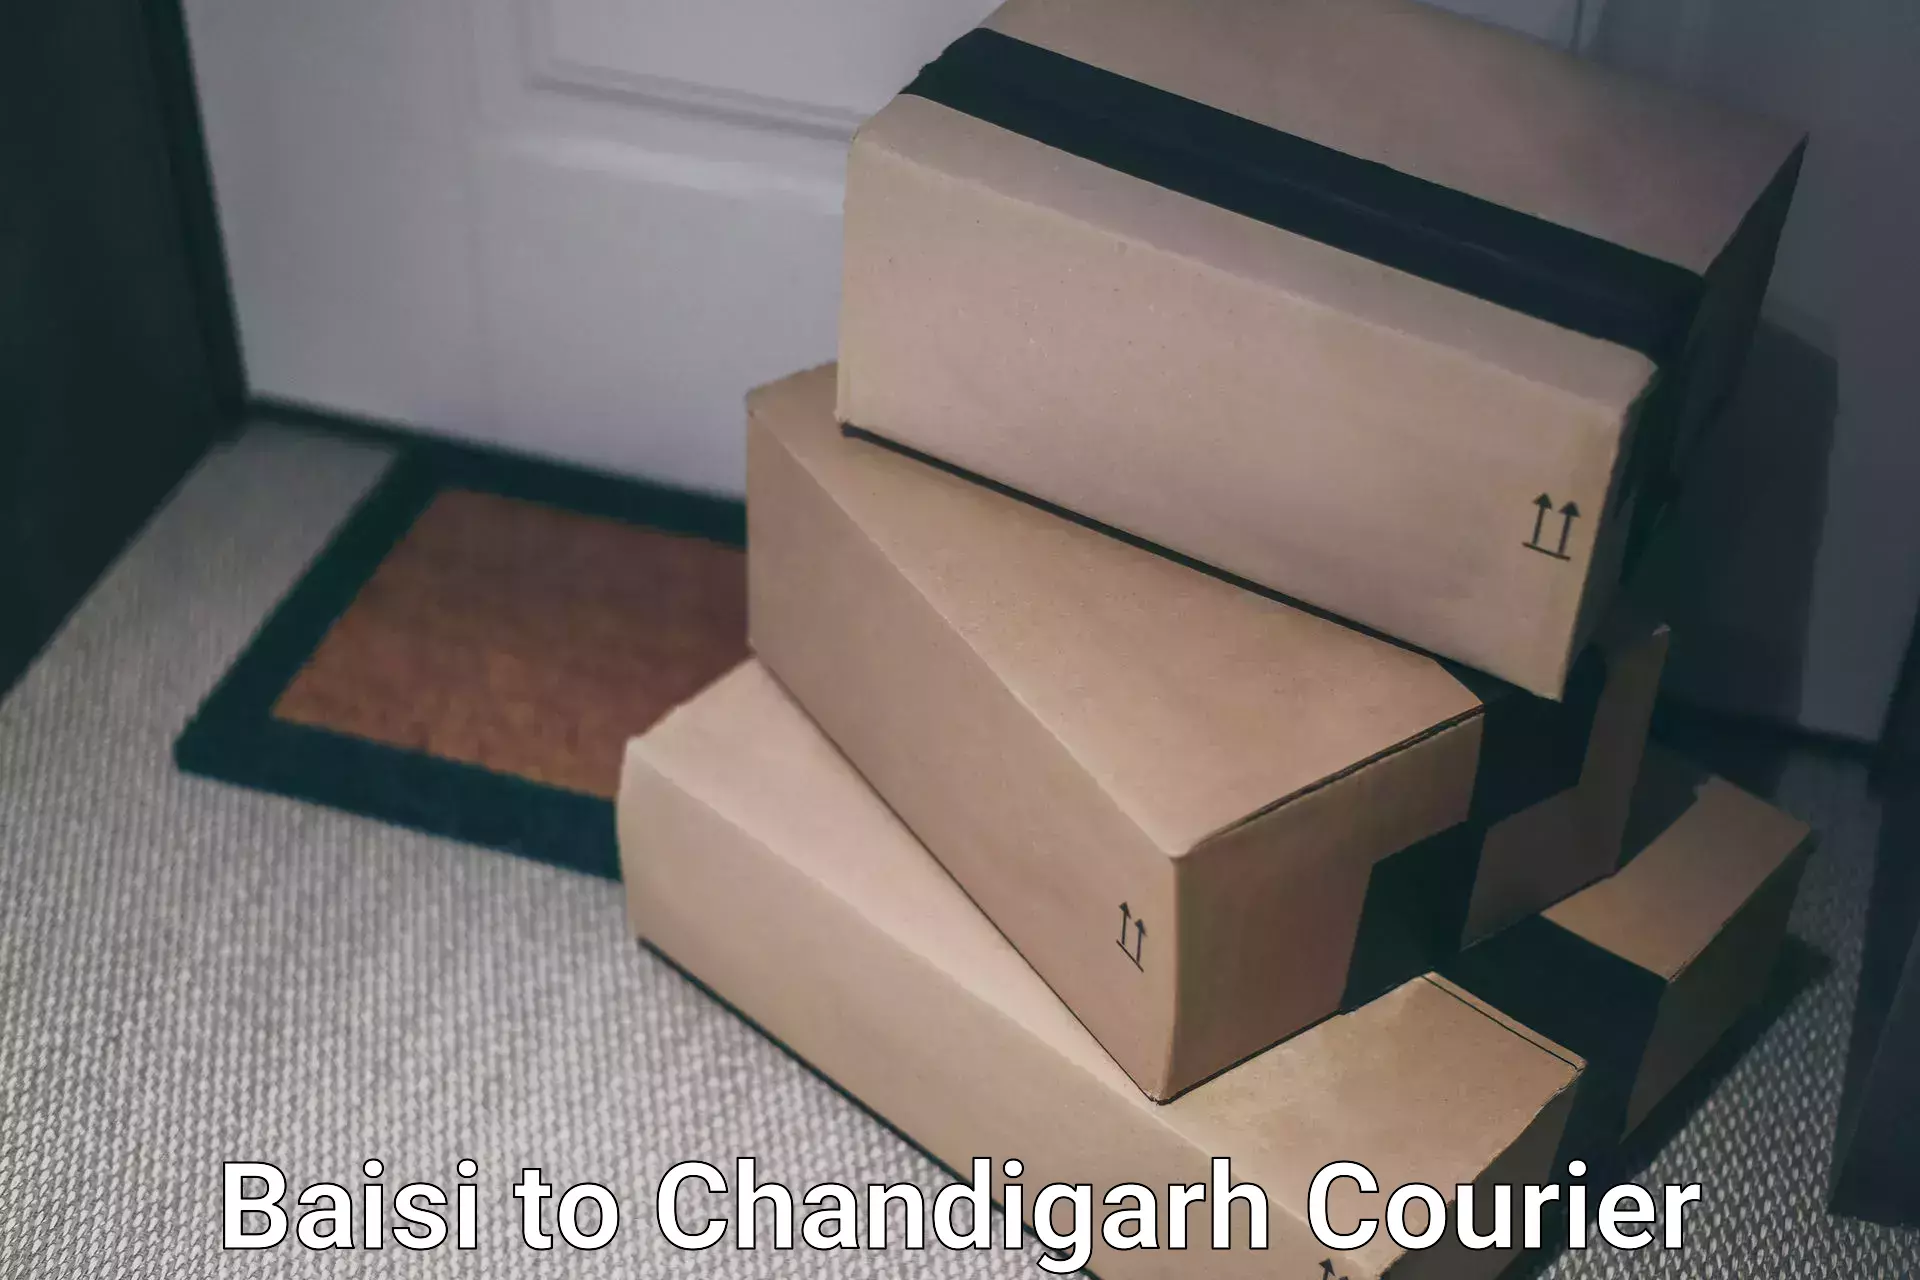 Express delivery network Baisi to Chandigarh